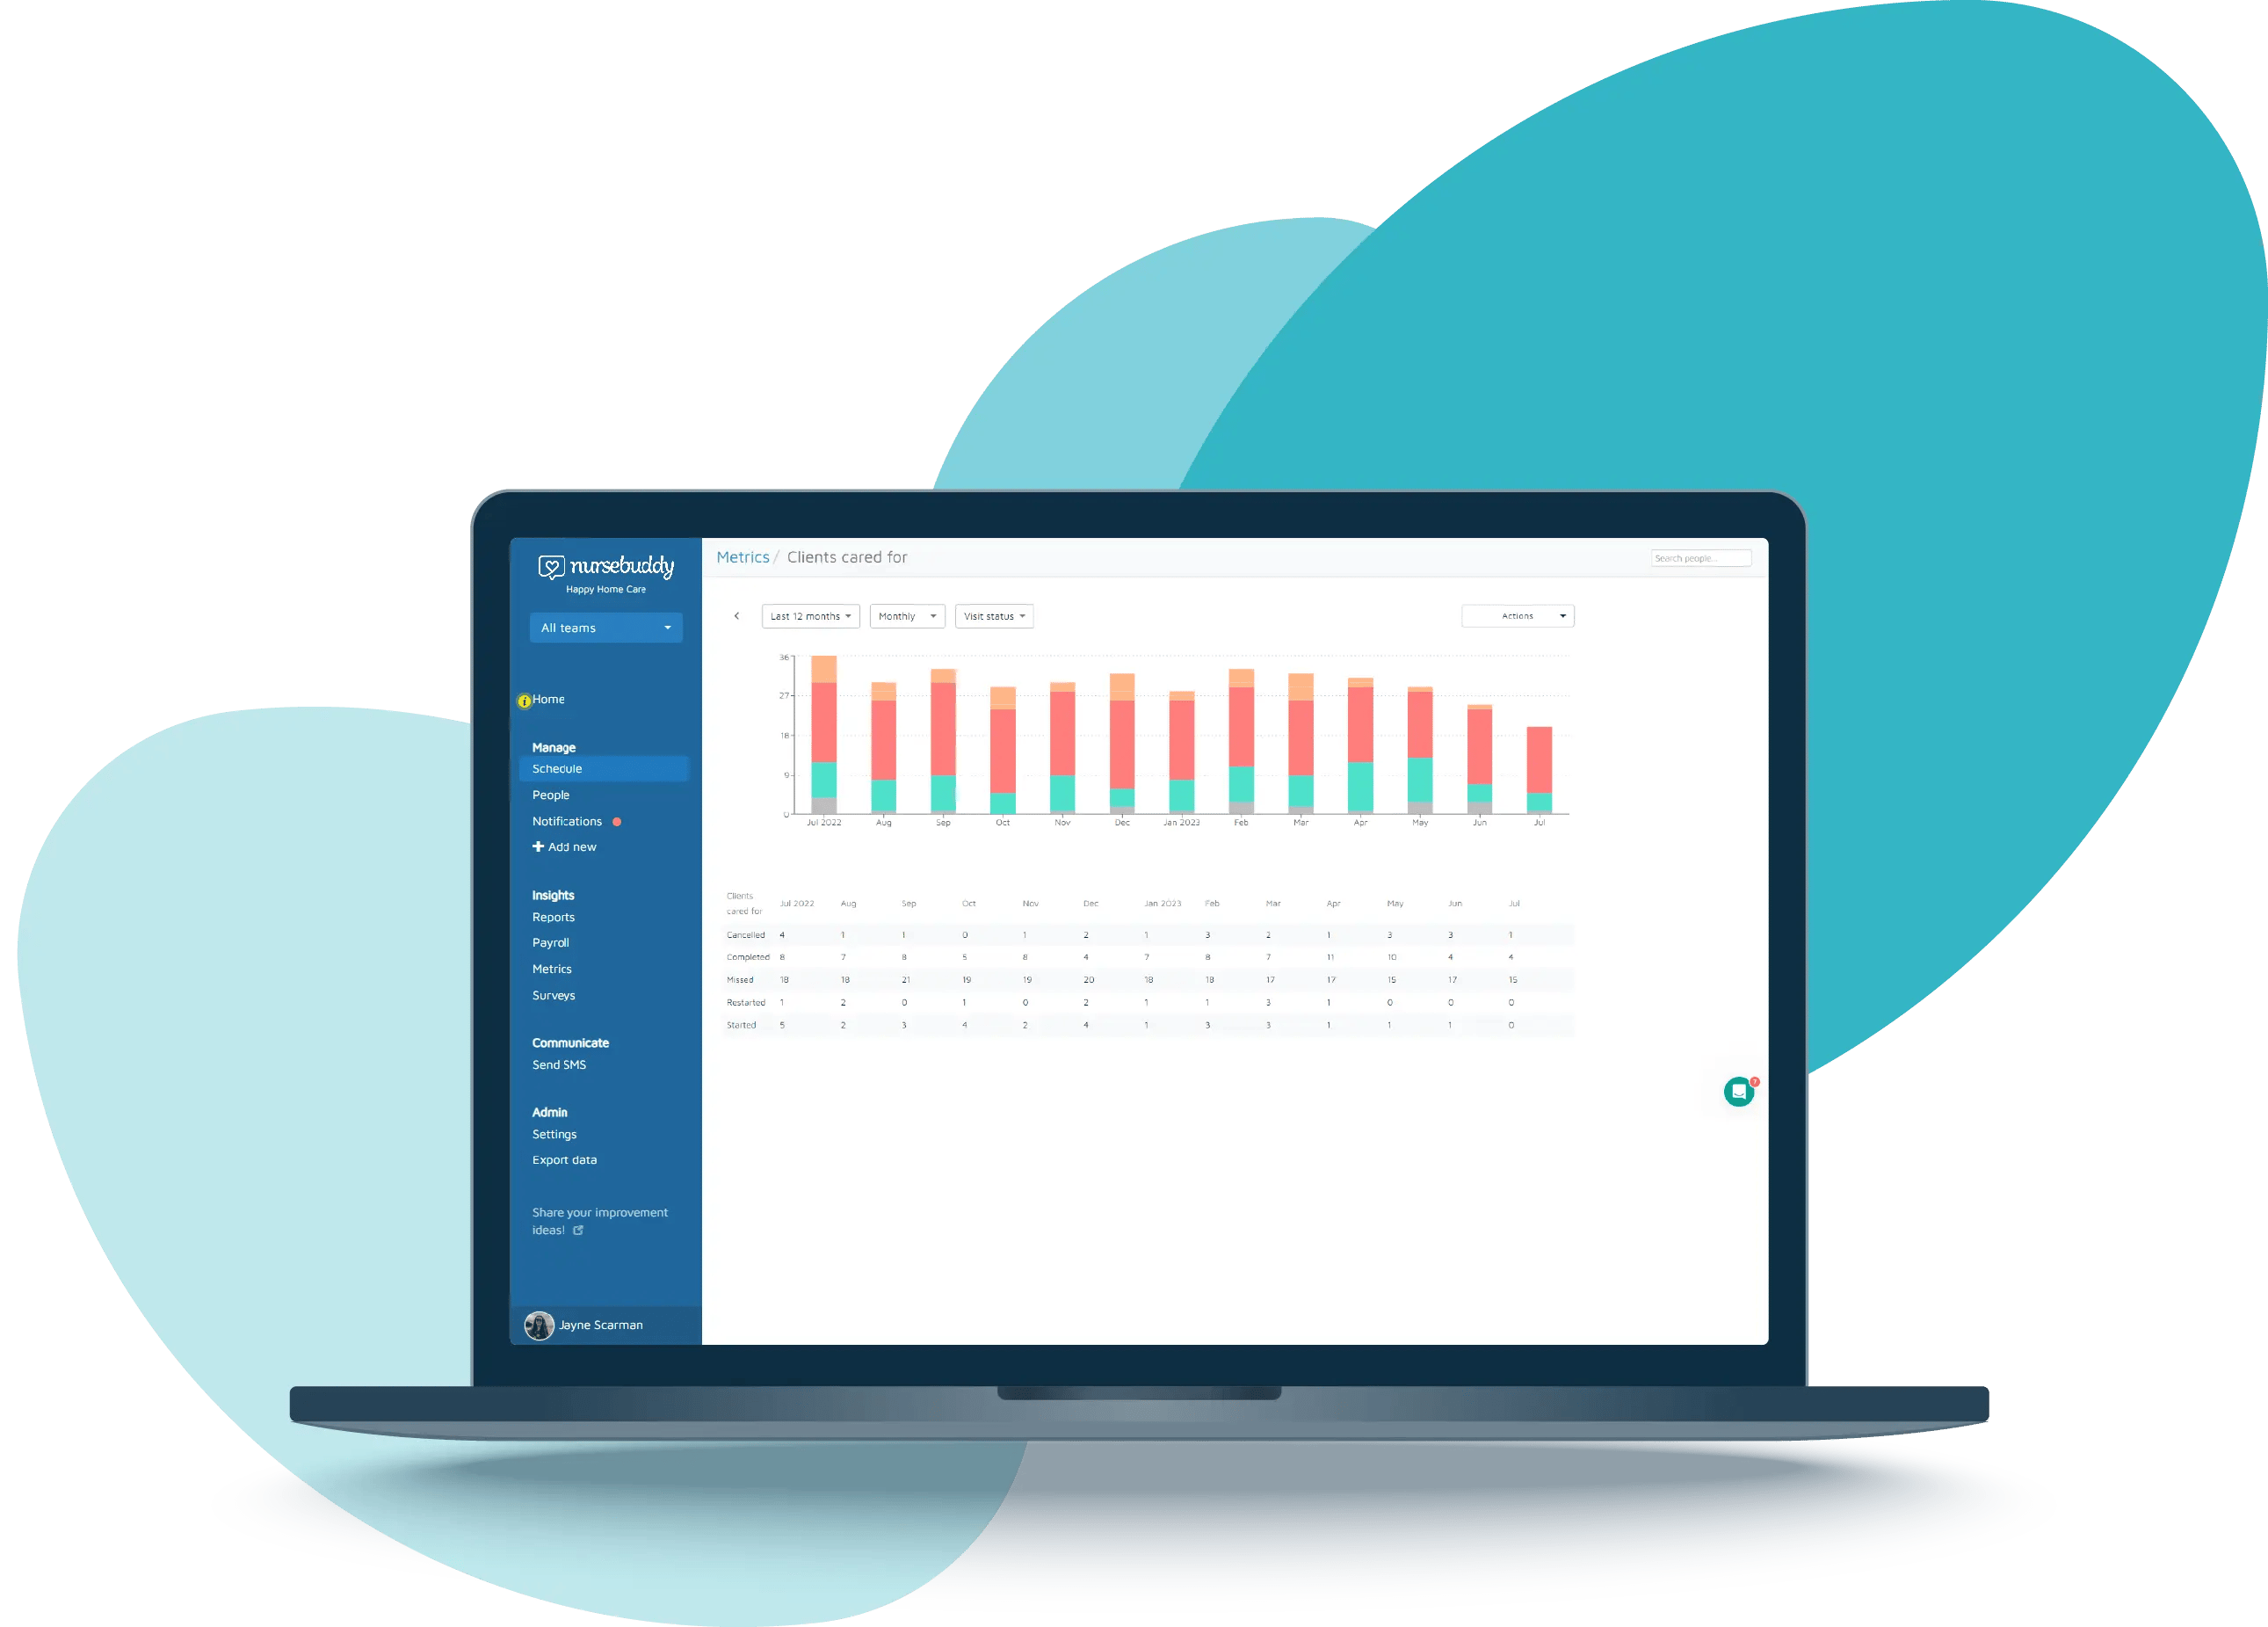 Charts and metrics in Nursebuddy, shown on a laptop